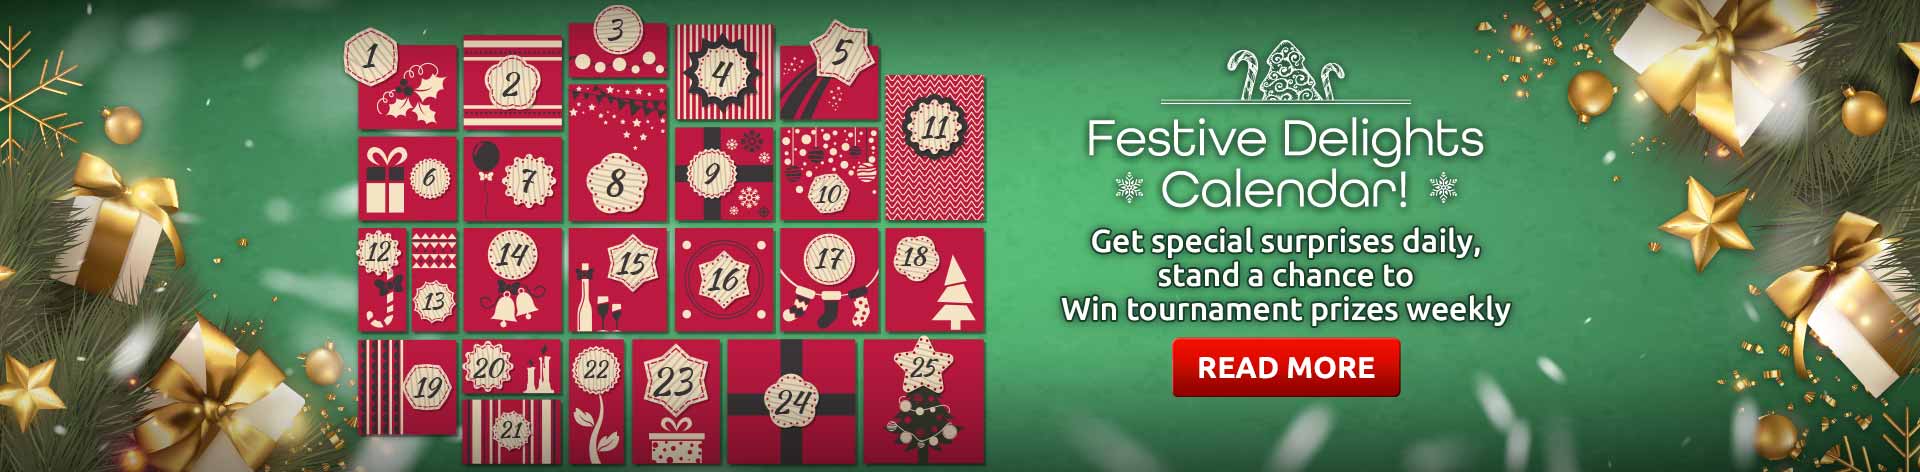 Festive Delights Calendar! Get special surprises daily, stand a chance to wn tournament prizes weekly. Read more...